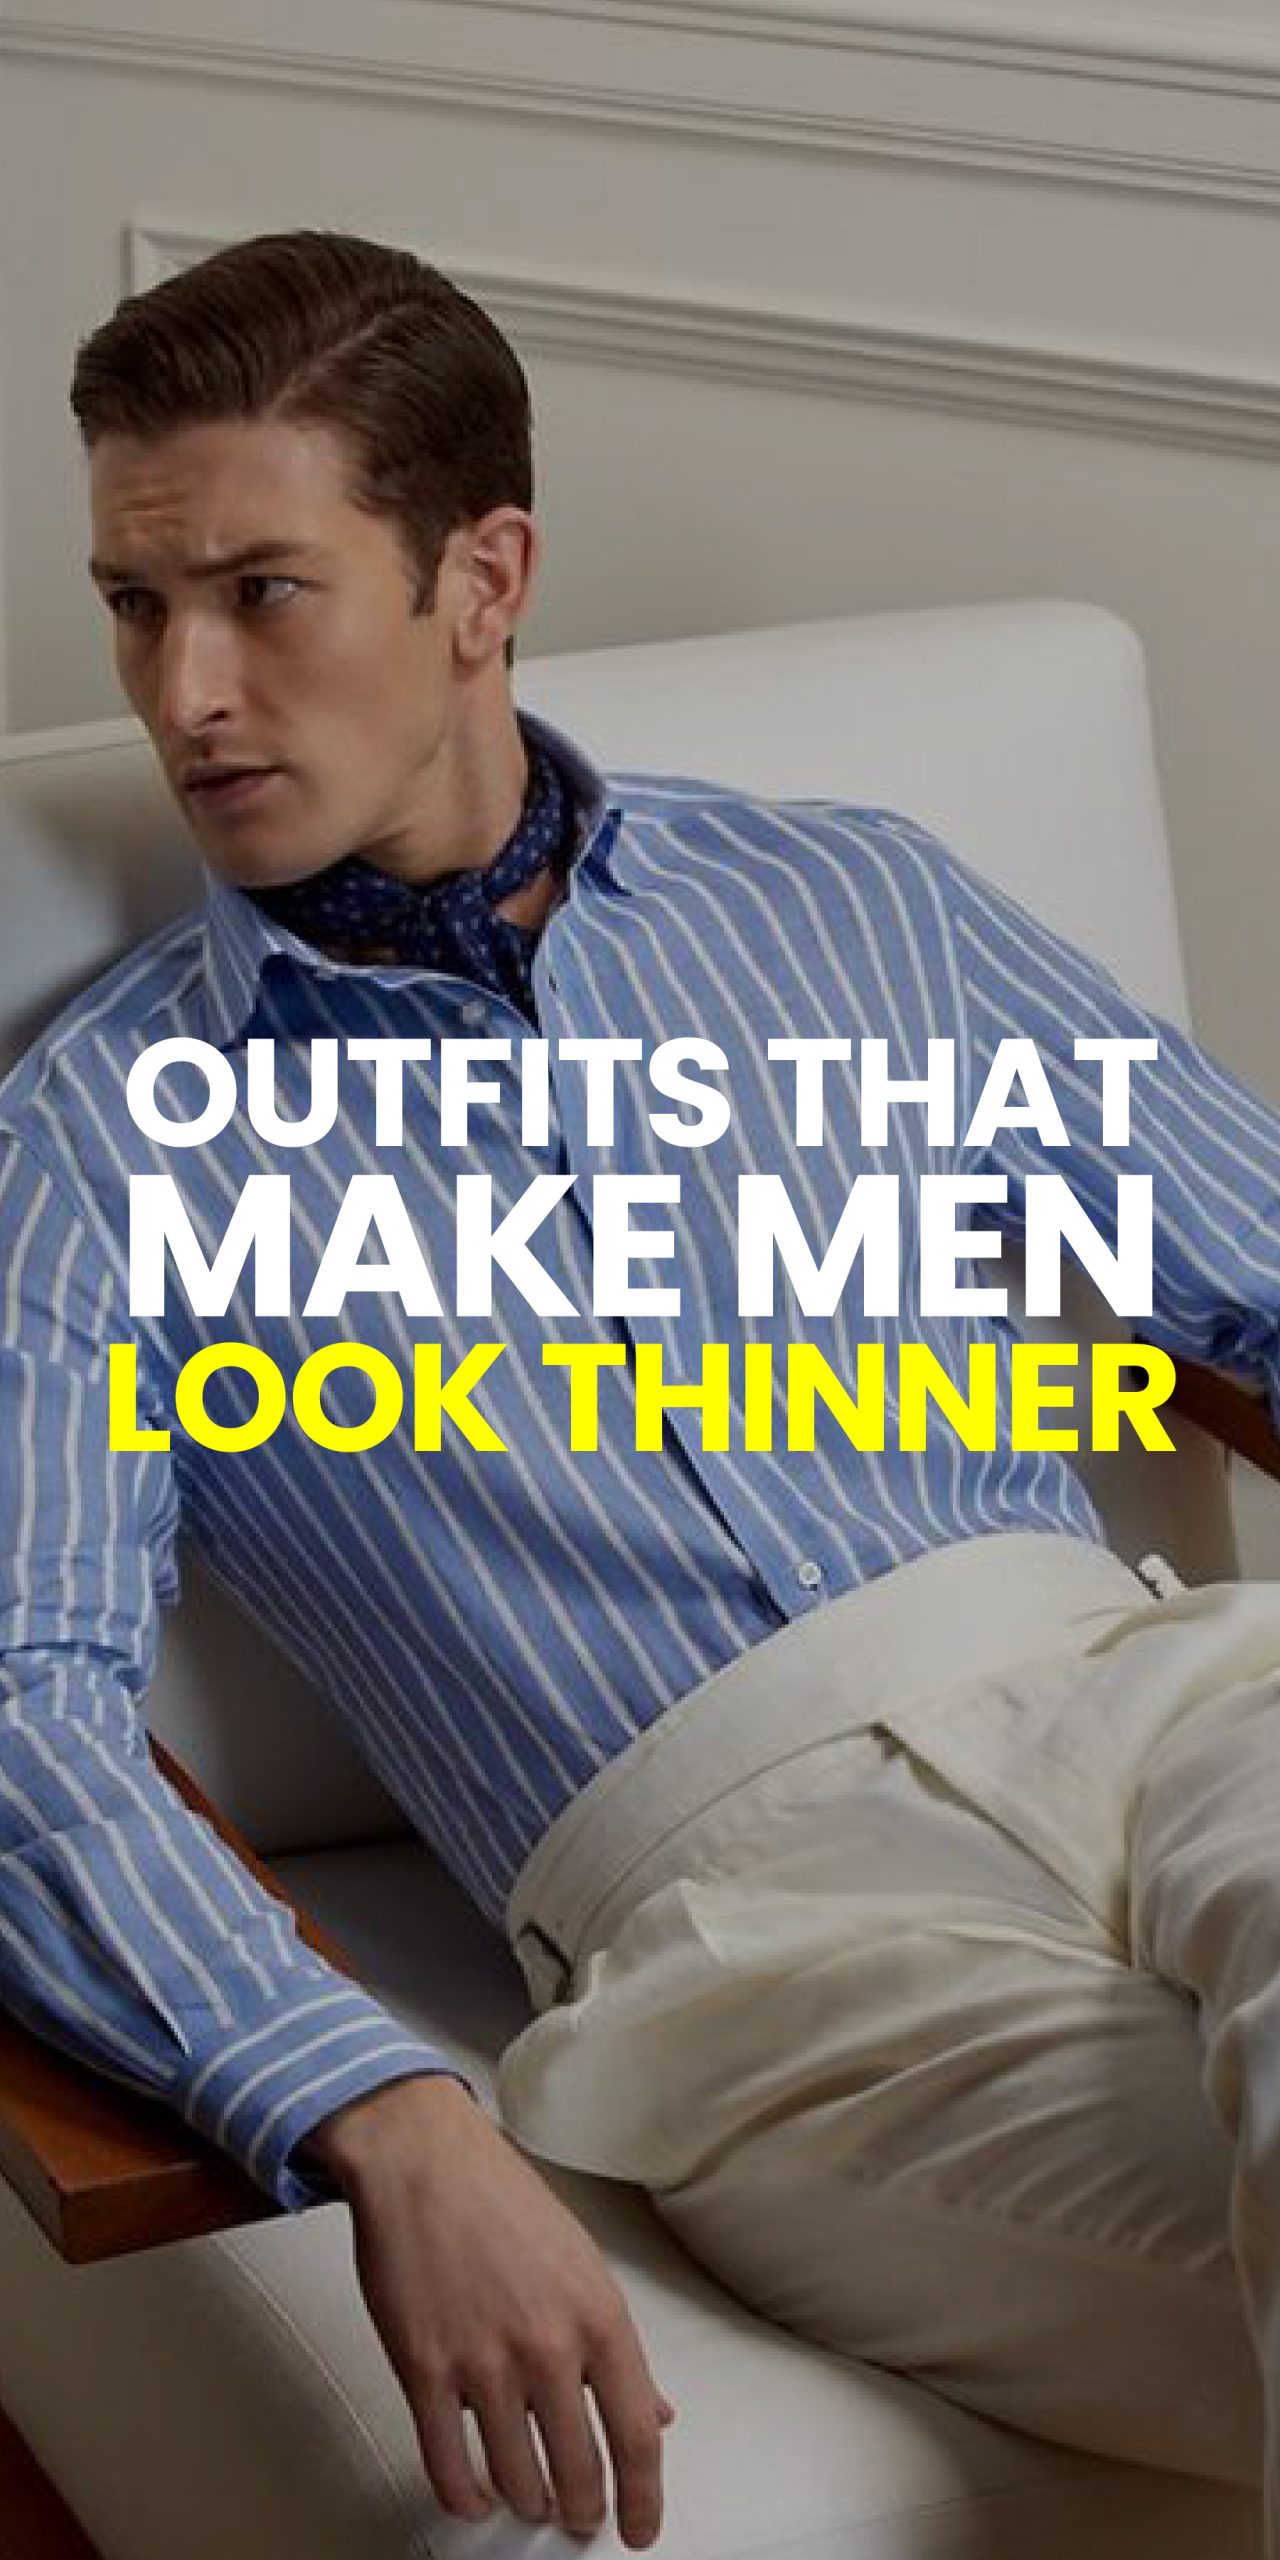 OUTFIT THAT MAKE MEN LOOK THINNER